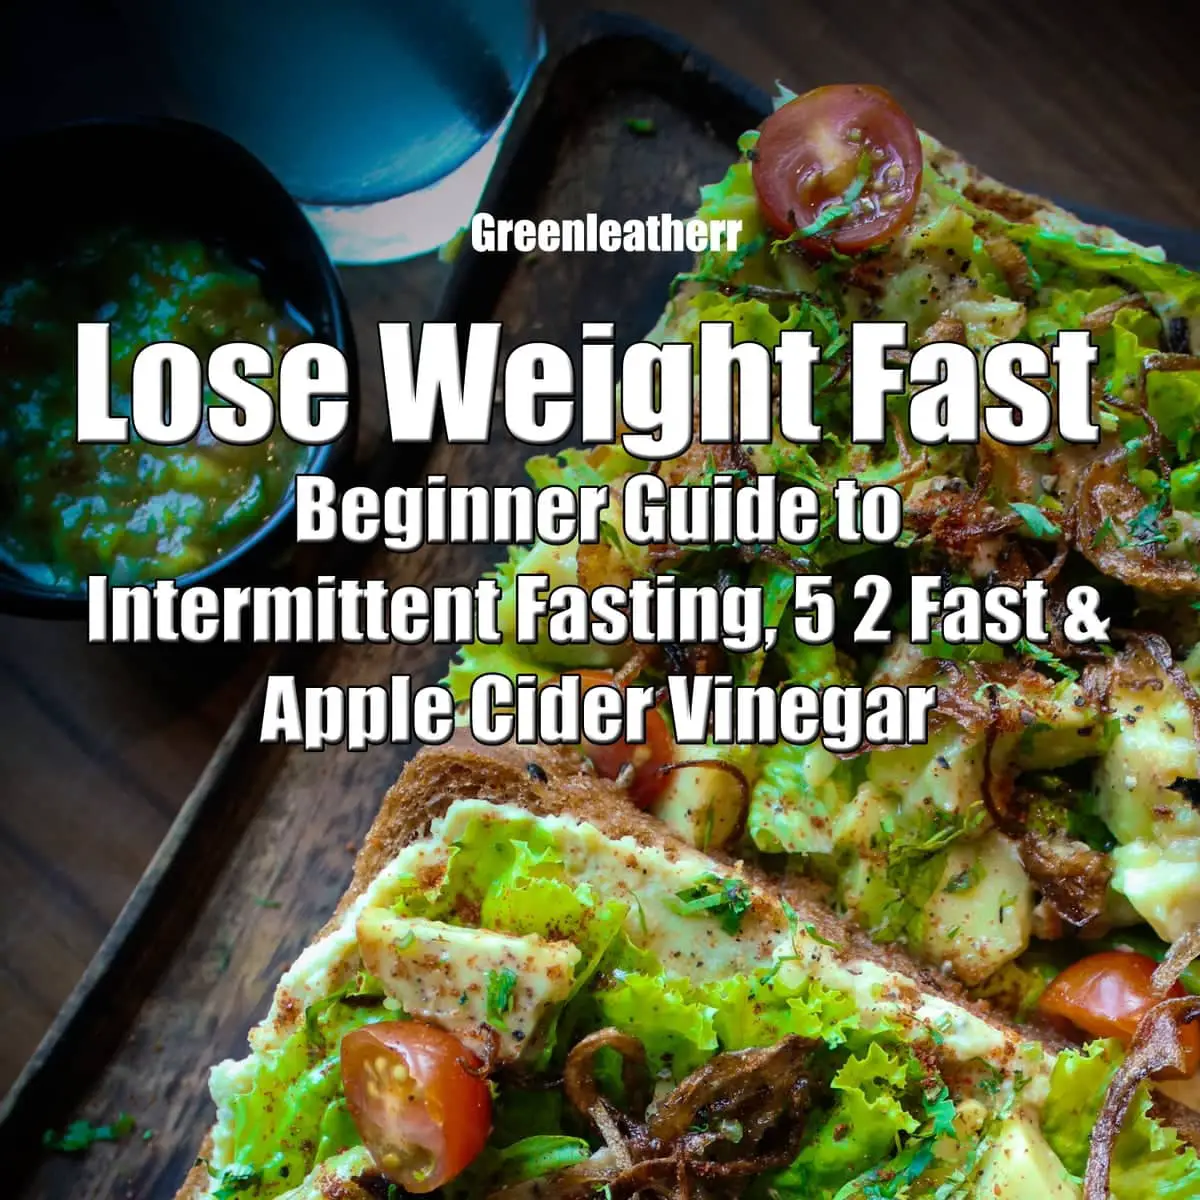 Free Intermittent Fasting App For Apple Watch : The top 5 myths of ...